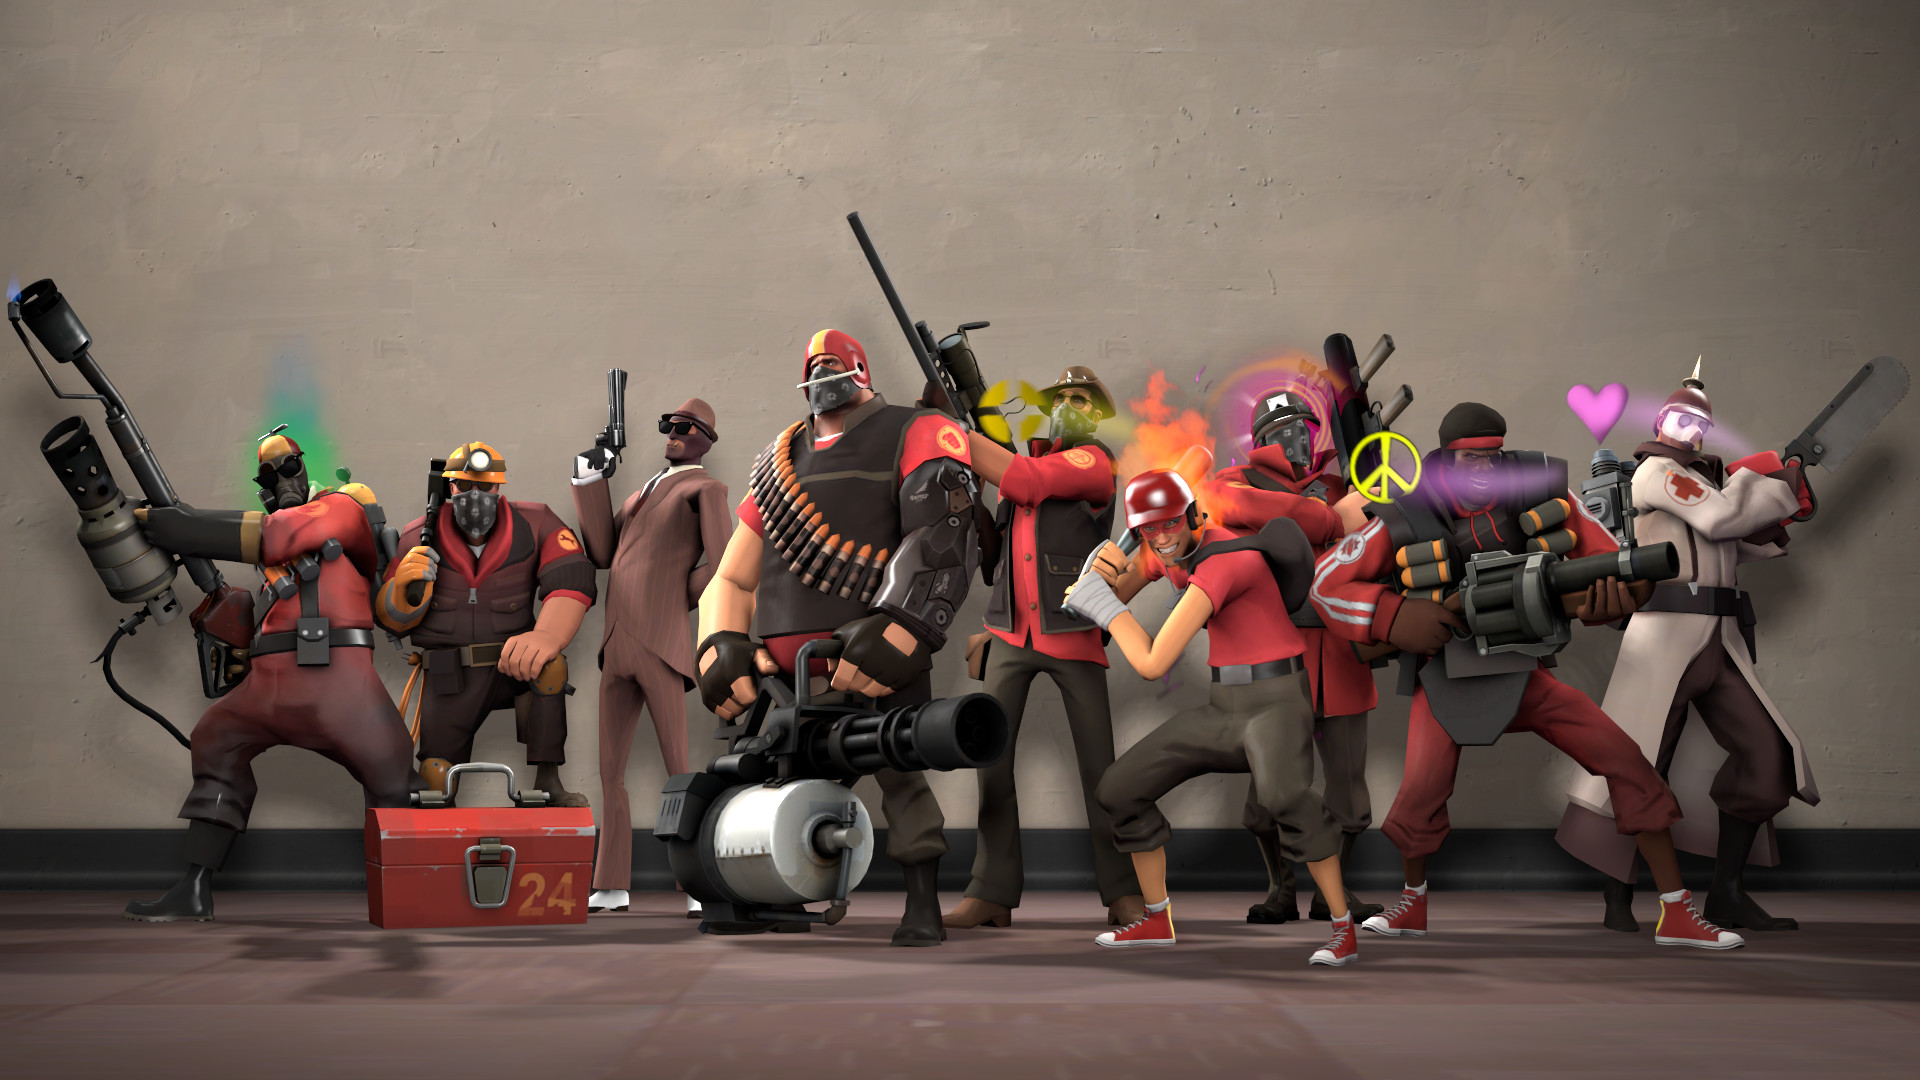 1920x1080 [SFM] was bored so i made the tf2 class lineup with my cosmetics #games  #teamfortress2 #steam #tf2 #SteamNewRelease #gaming #Valve